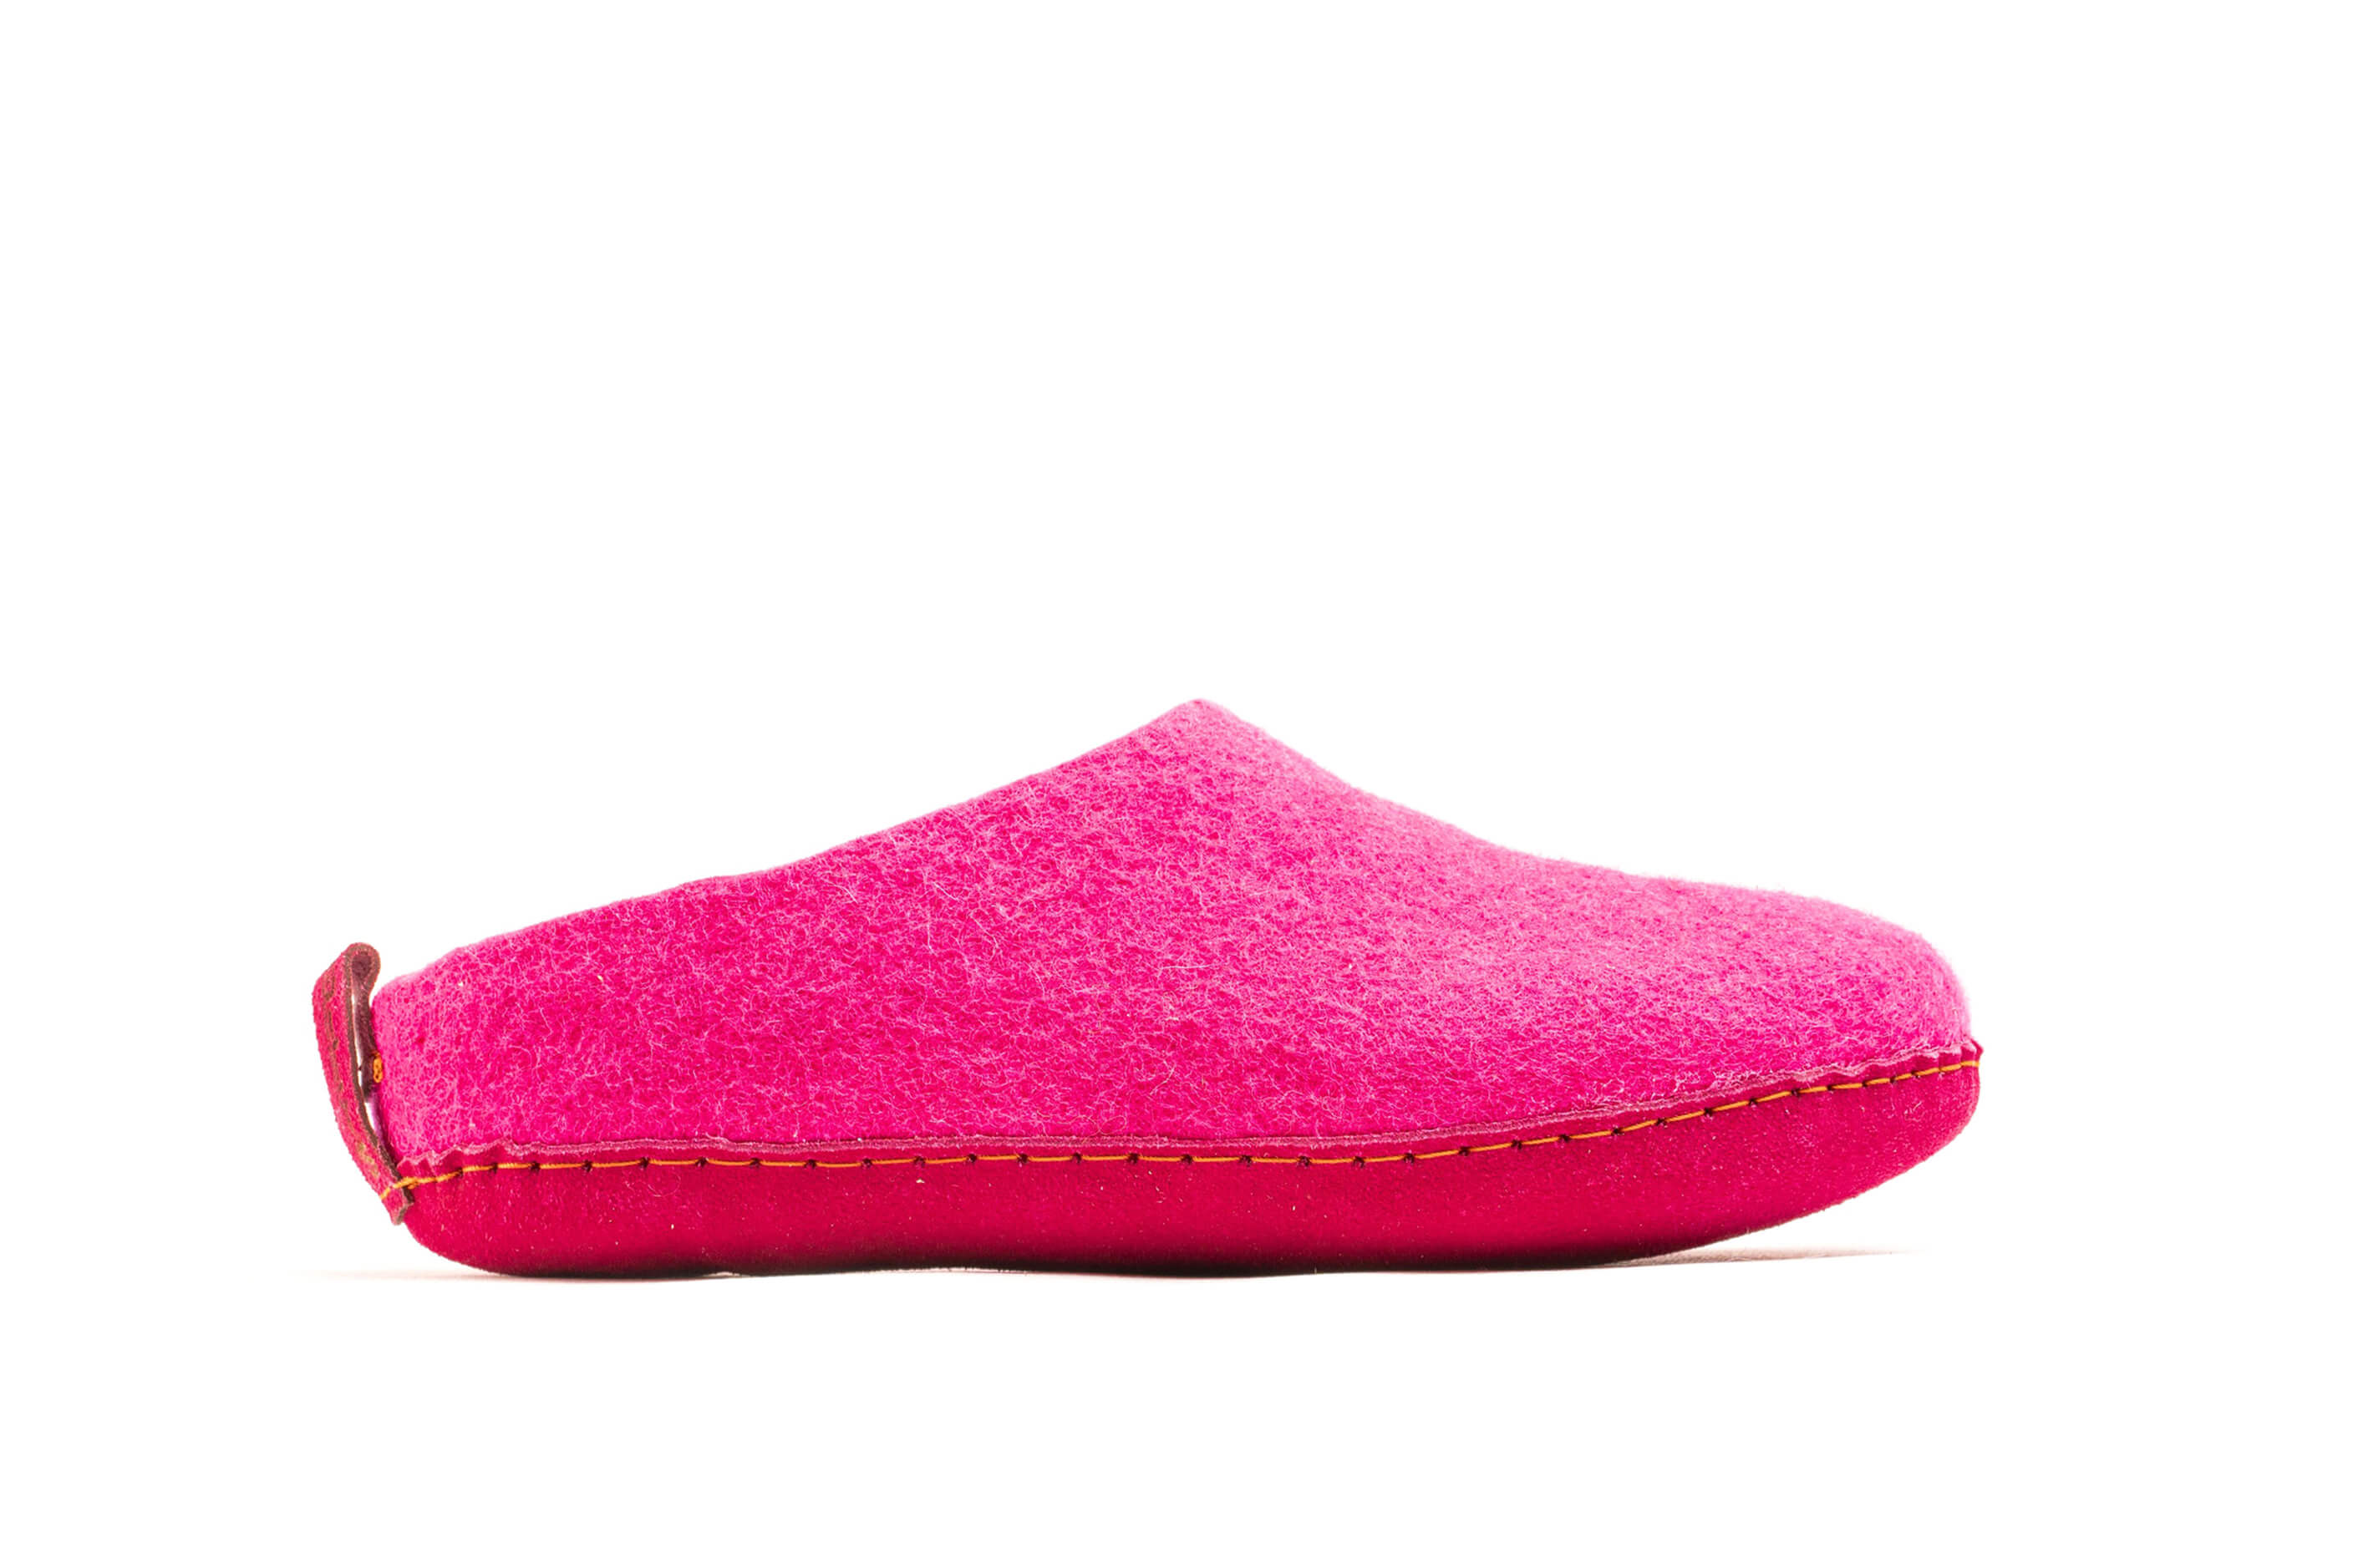 Indoor Open Heel Slippers With Leather Sole - Fuchsia 